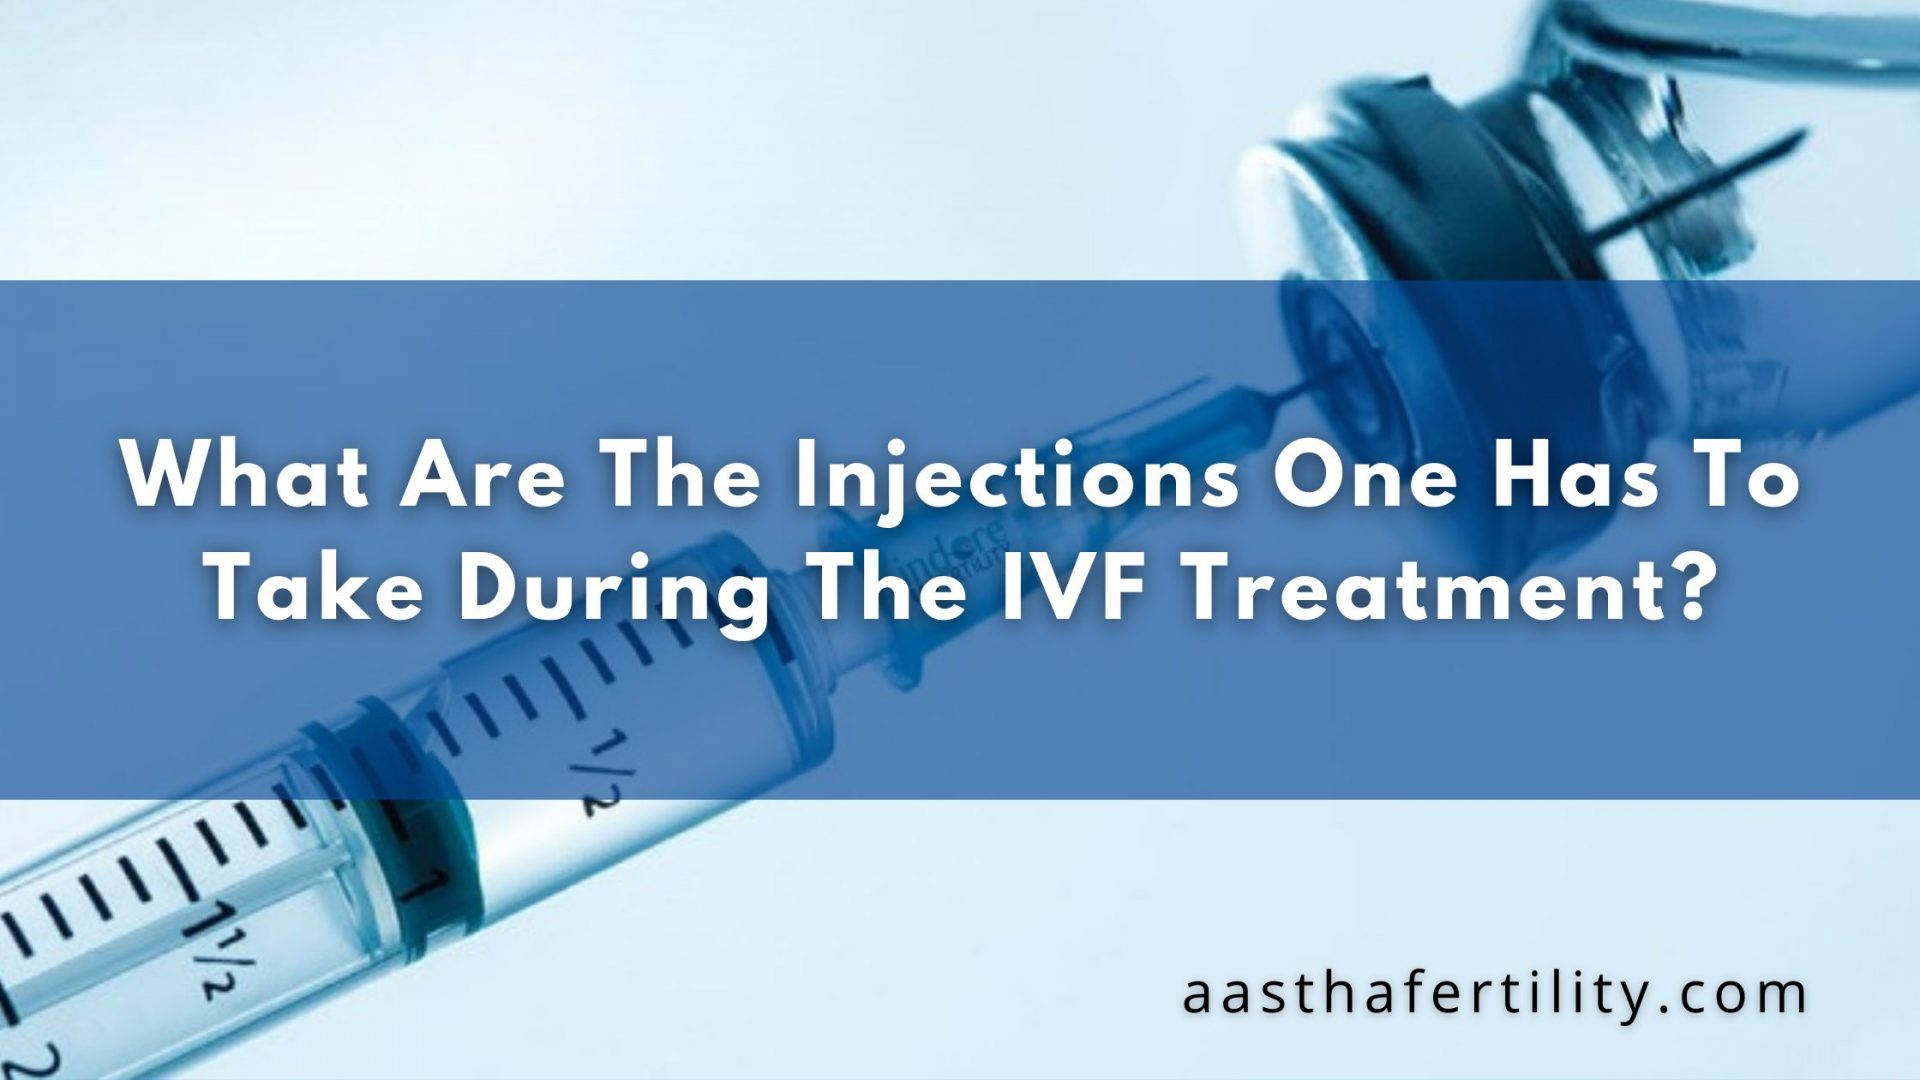 What Are The Injections One Has To Take During The IVF Treatment